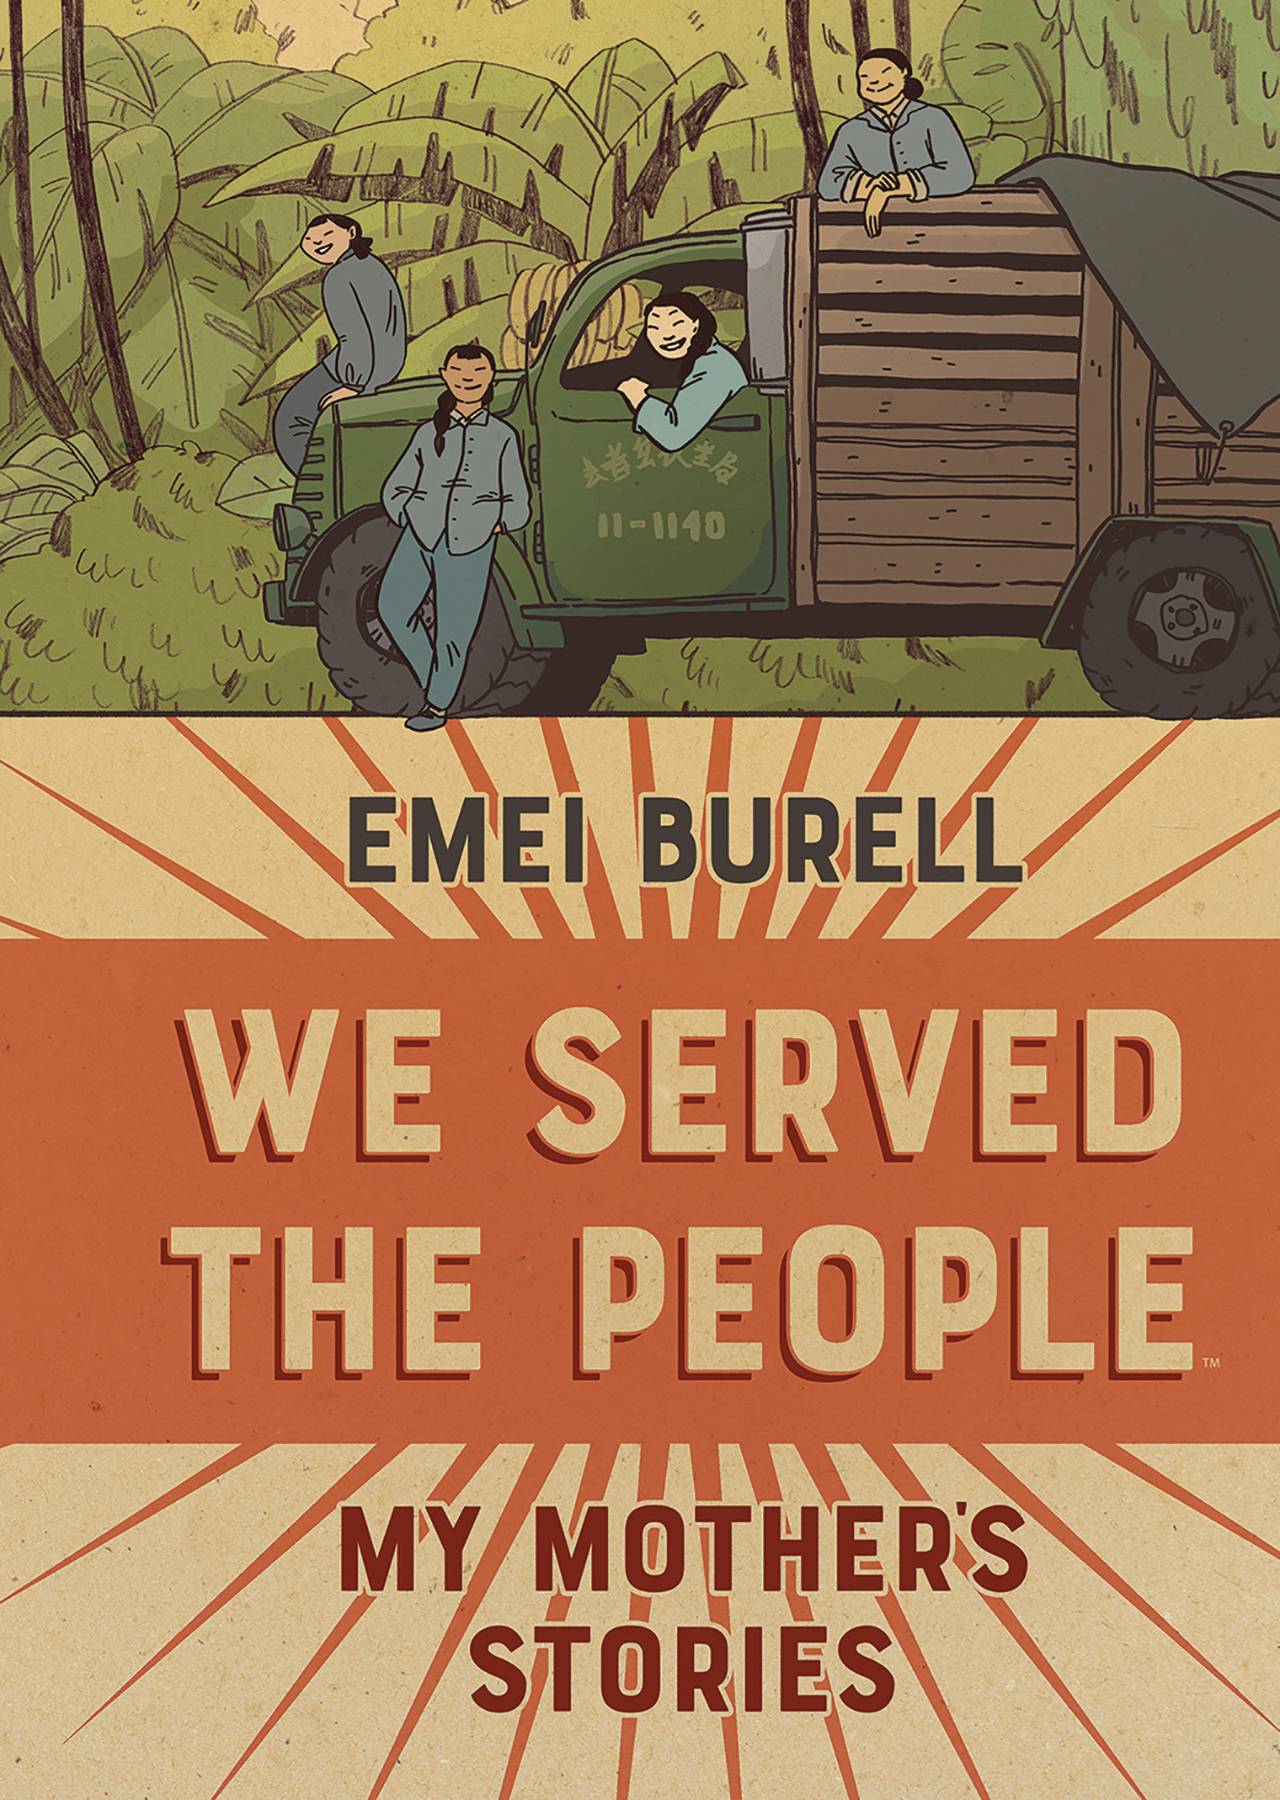 We Served The People My Mother's Stories HC